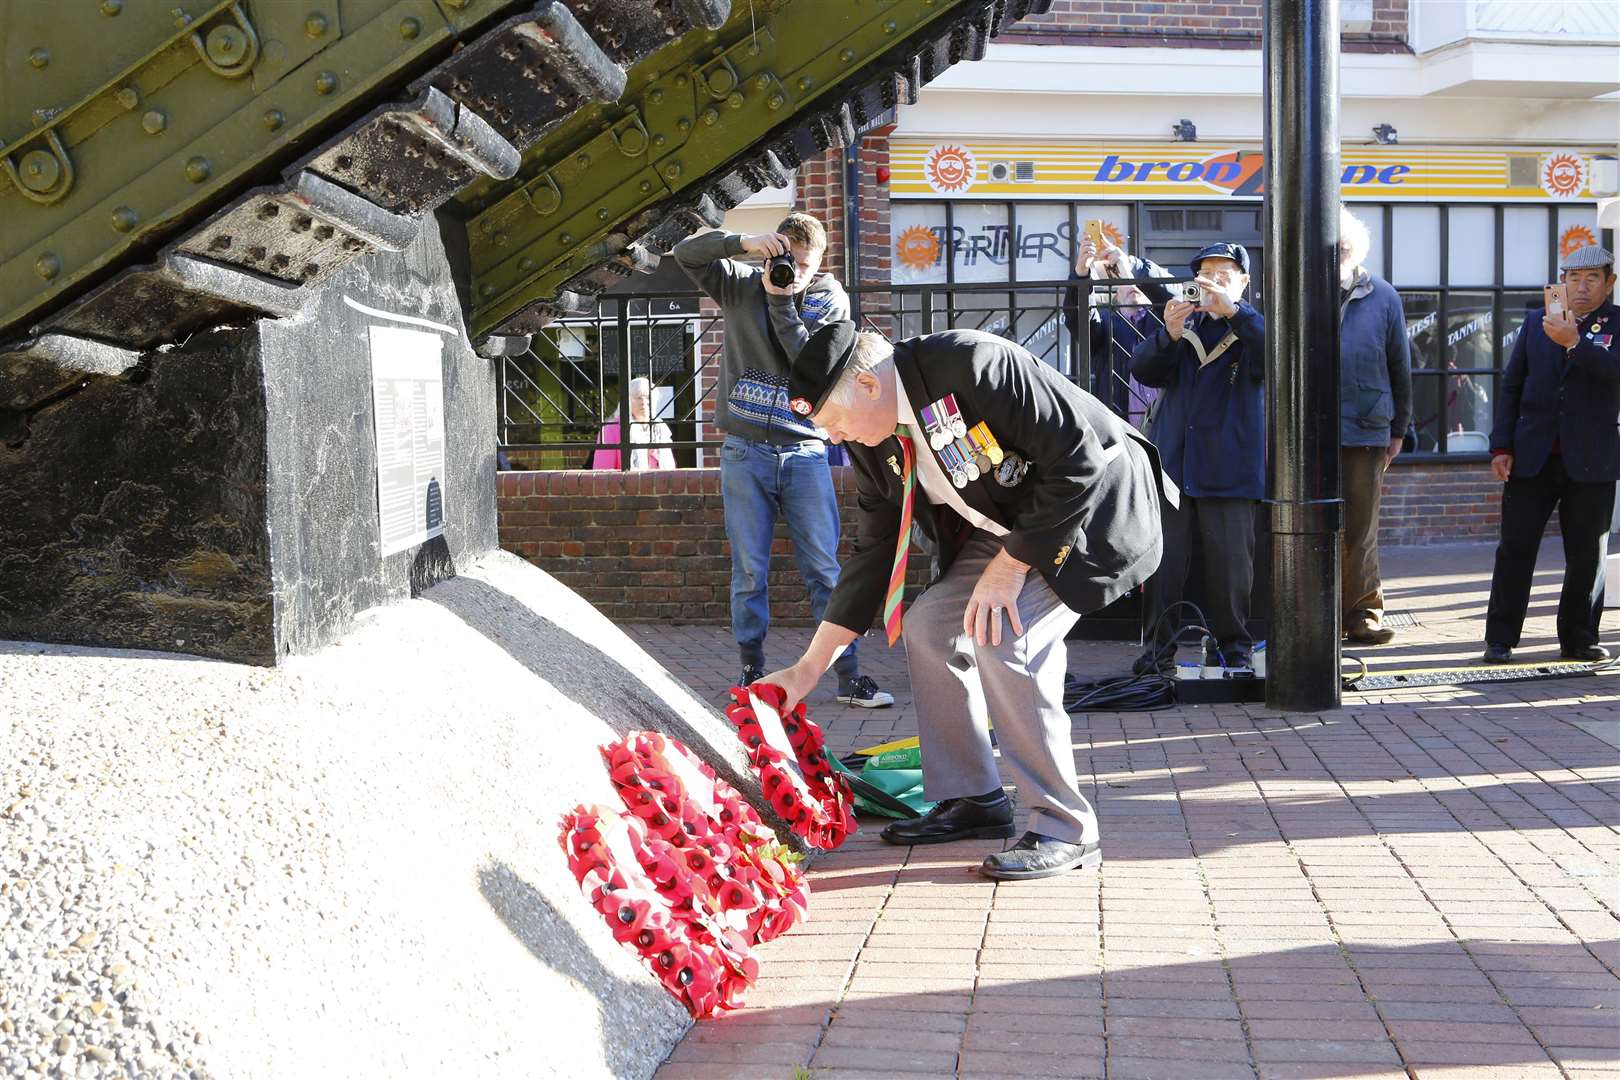 Wreaths were laid in front of the vehicle last year to remember the centenary of the first major tank offensive of the war, the Battle of Cambrai.